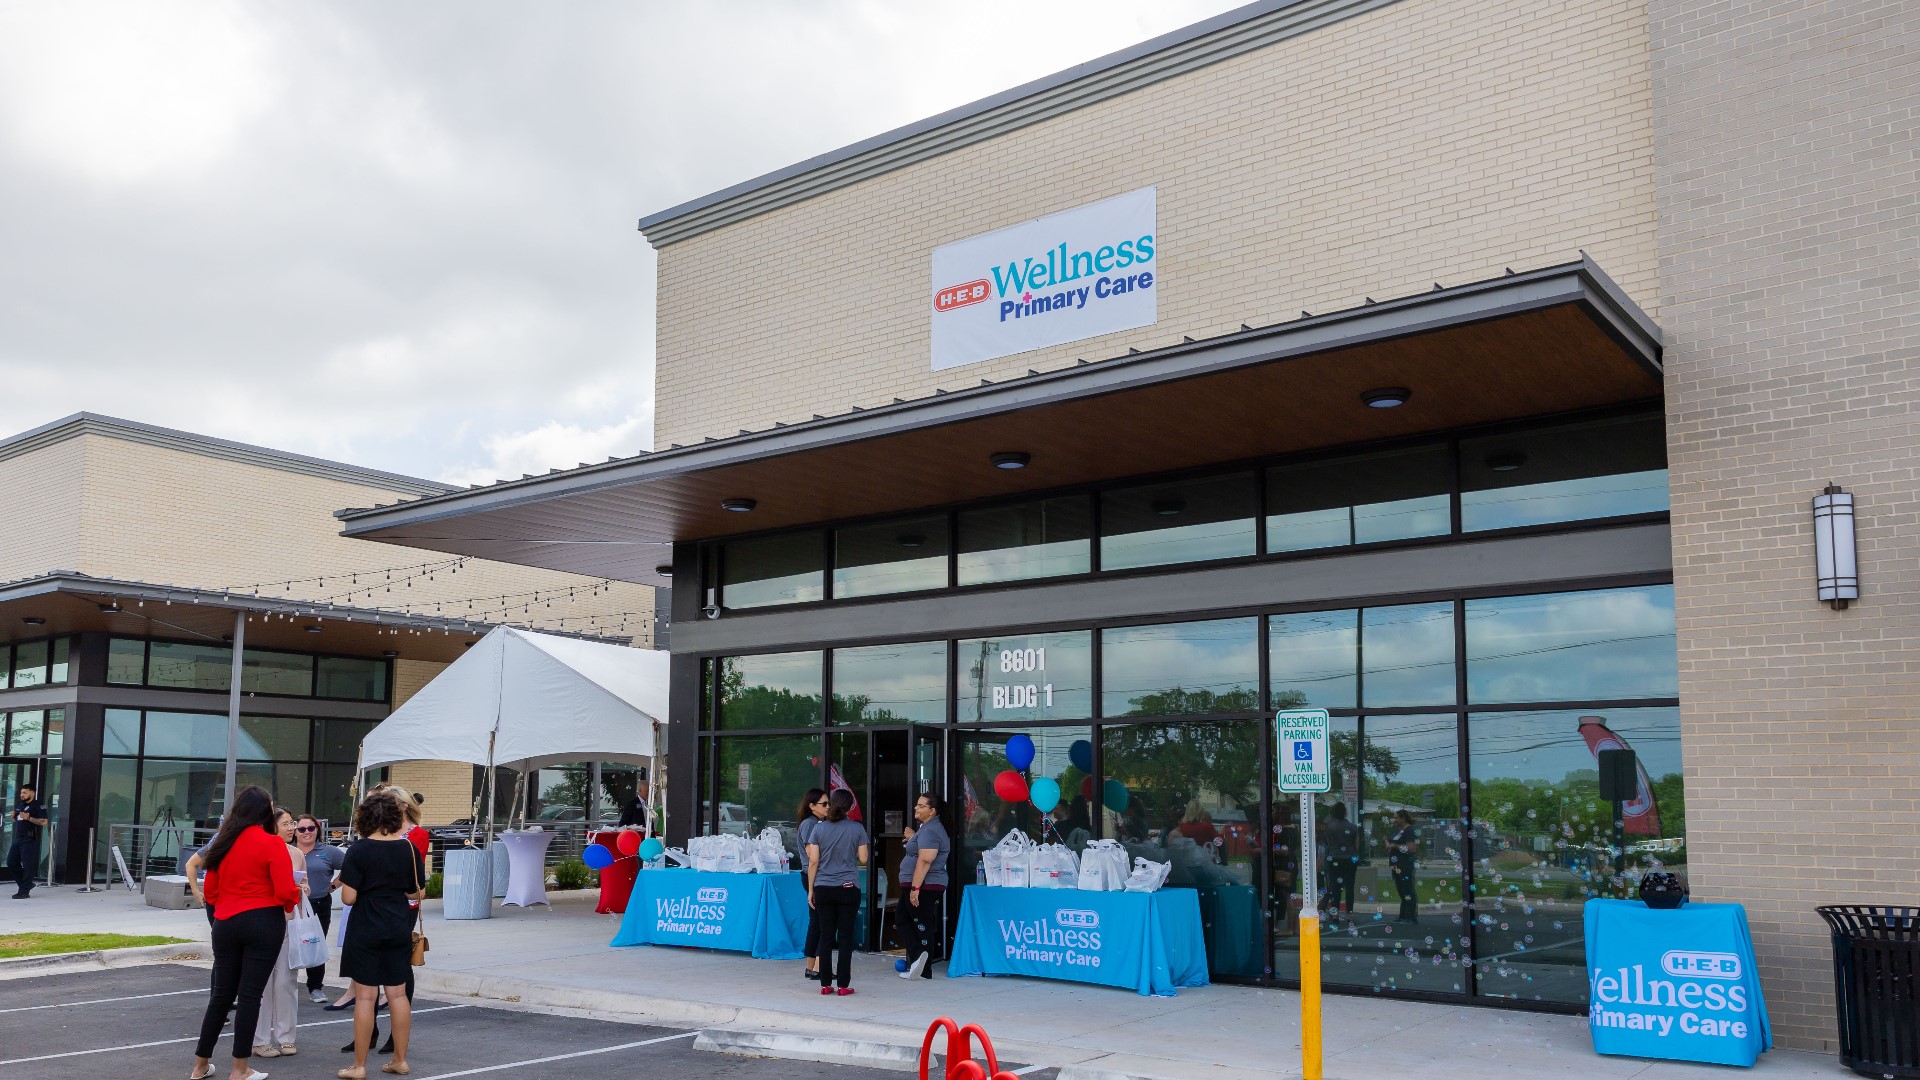 The Texas grocery chain also recently opened a clinic in Leander.